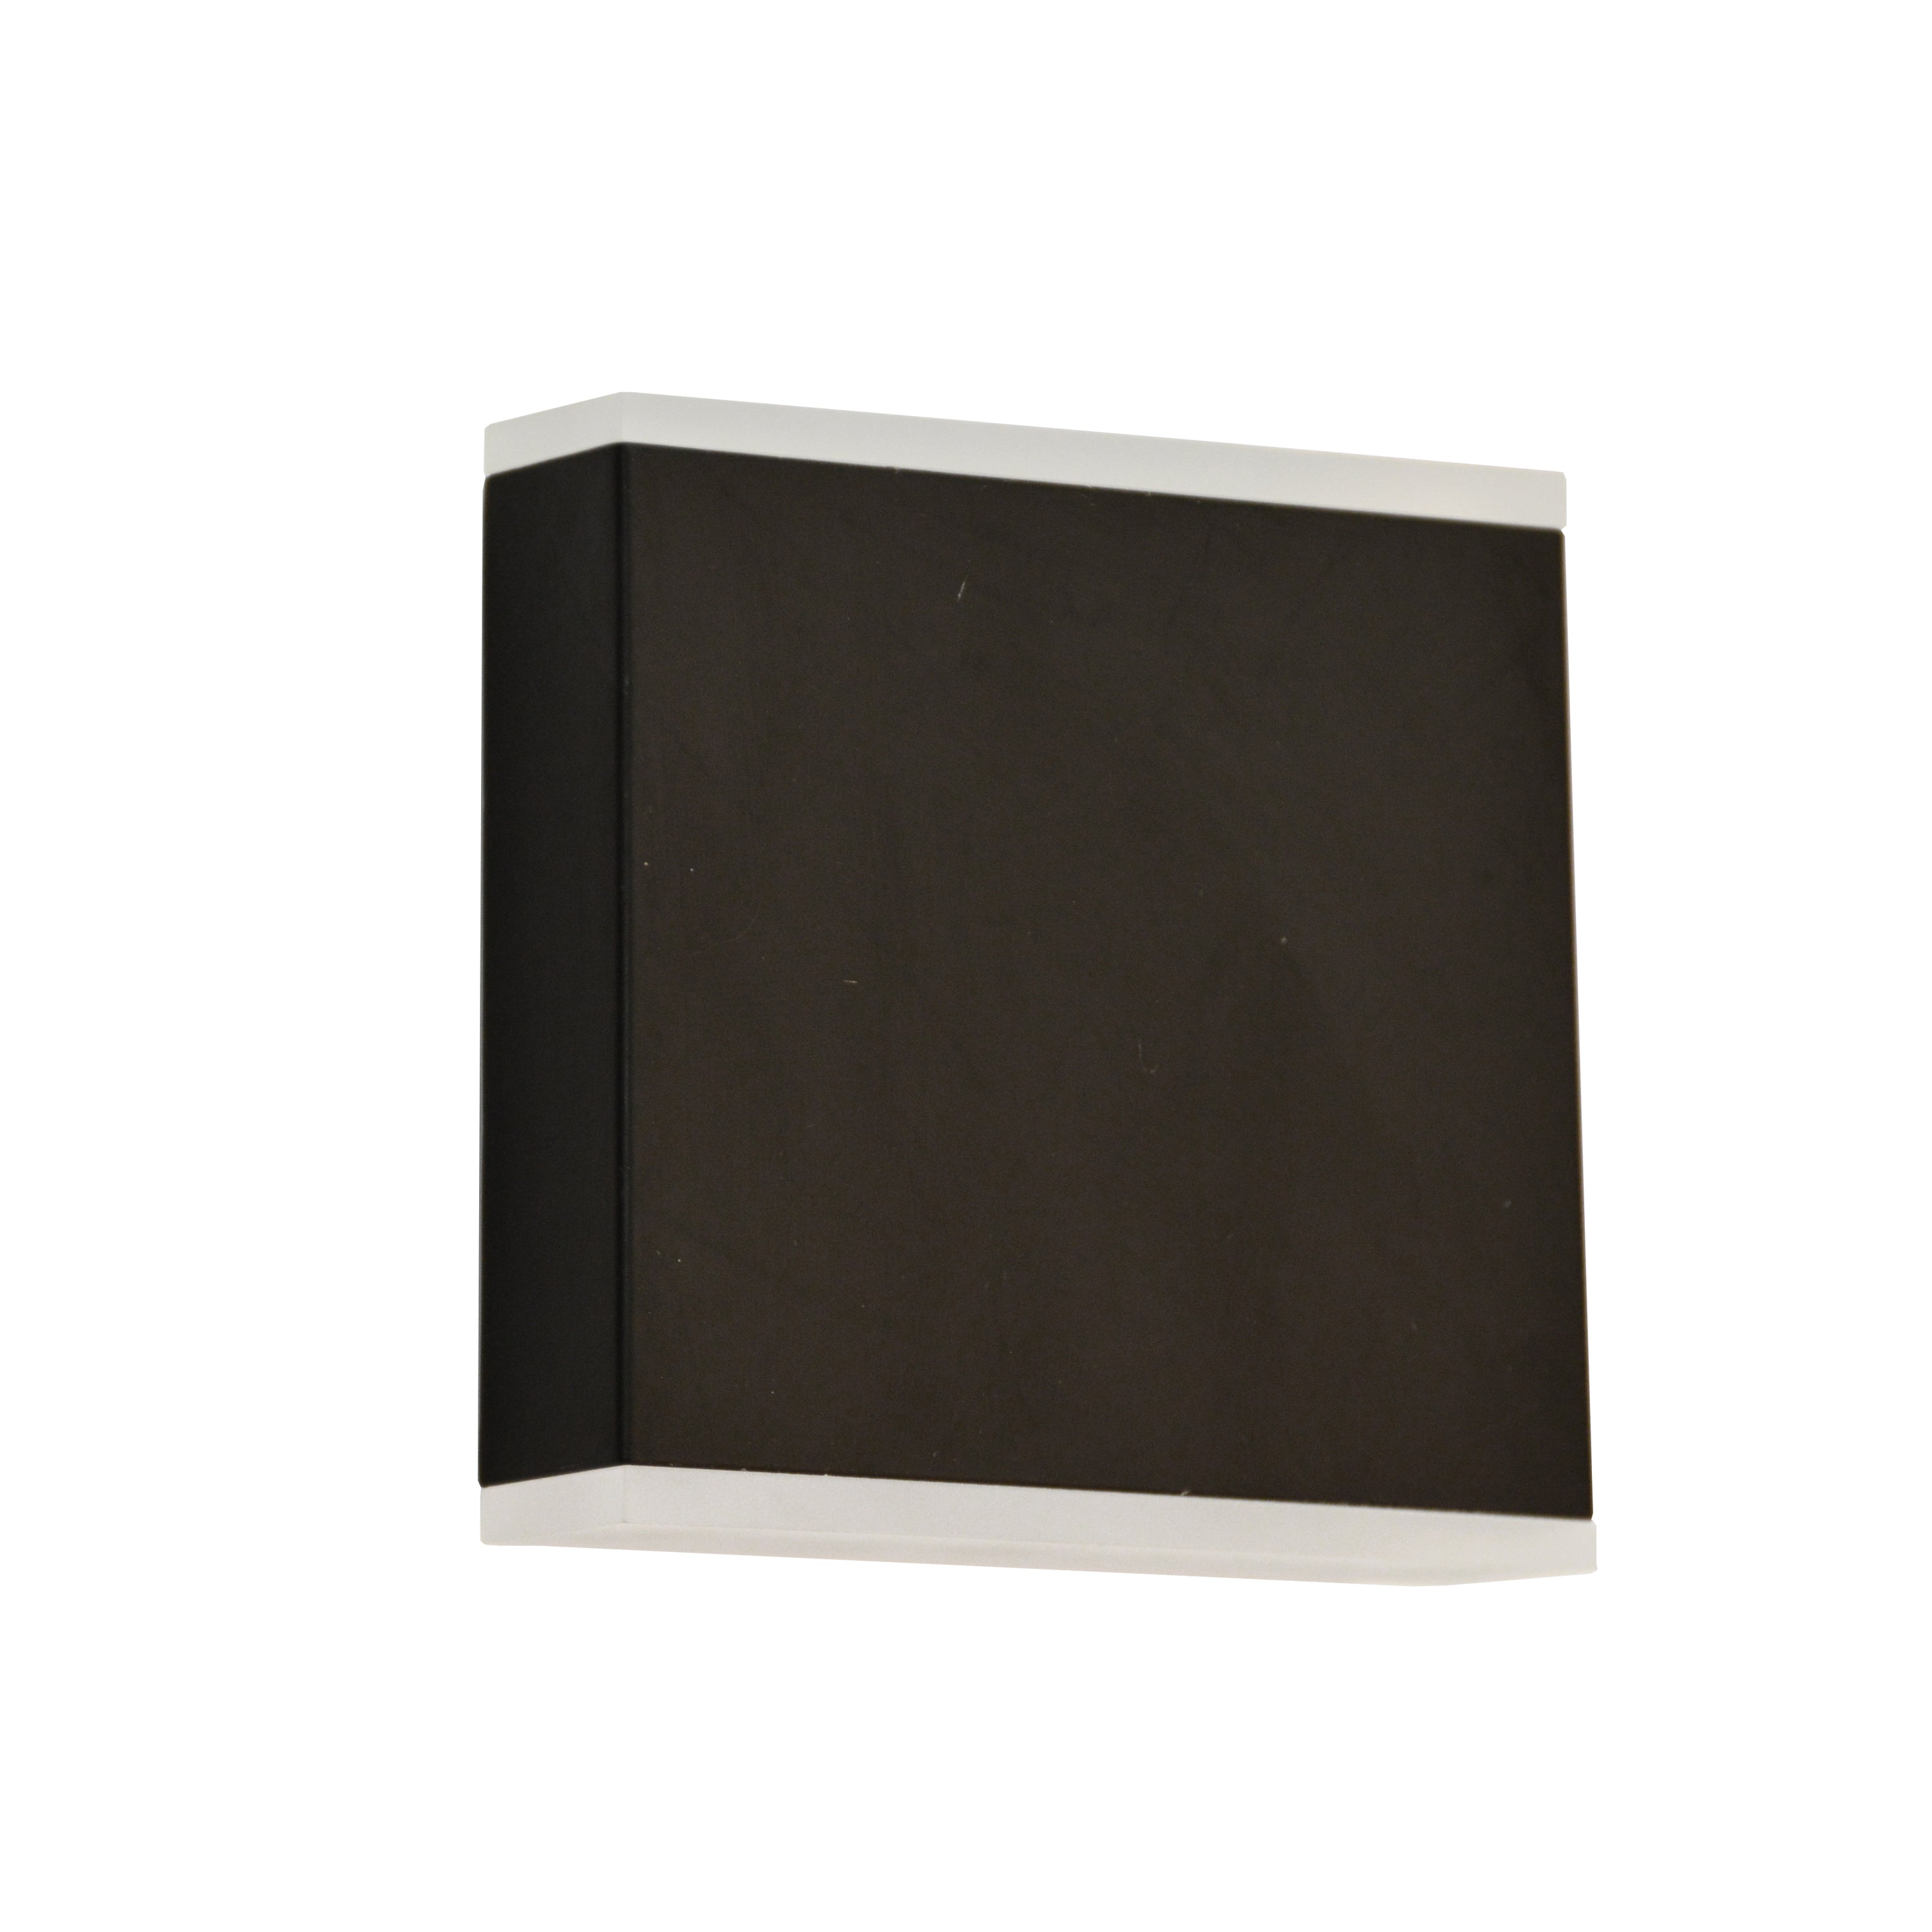 Dainolite Emery - EMY-550-5W-MB - 15W LED Wall Sconce, Matte Black with Frosted Acrylic Diffuser - Black